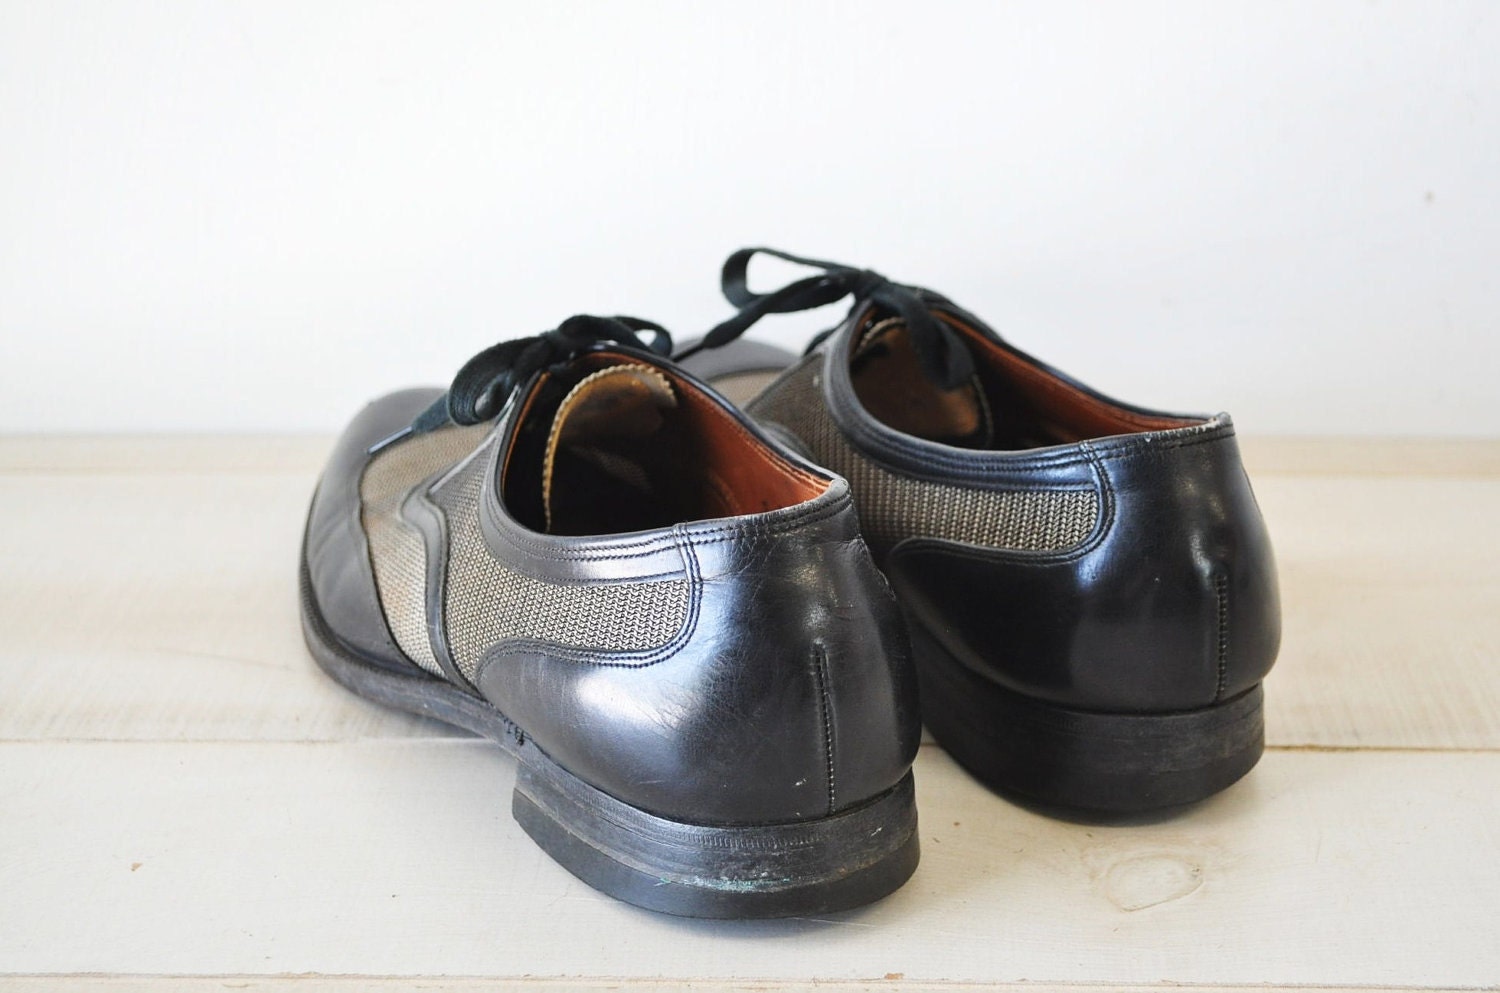 vintage 1940s to 1950s ventilated spectator shoesmans or